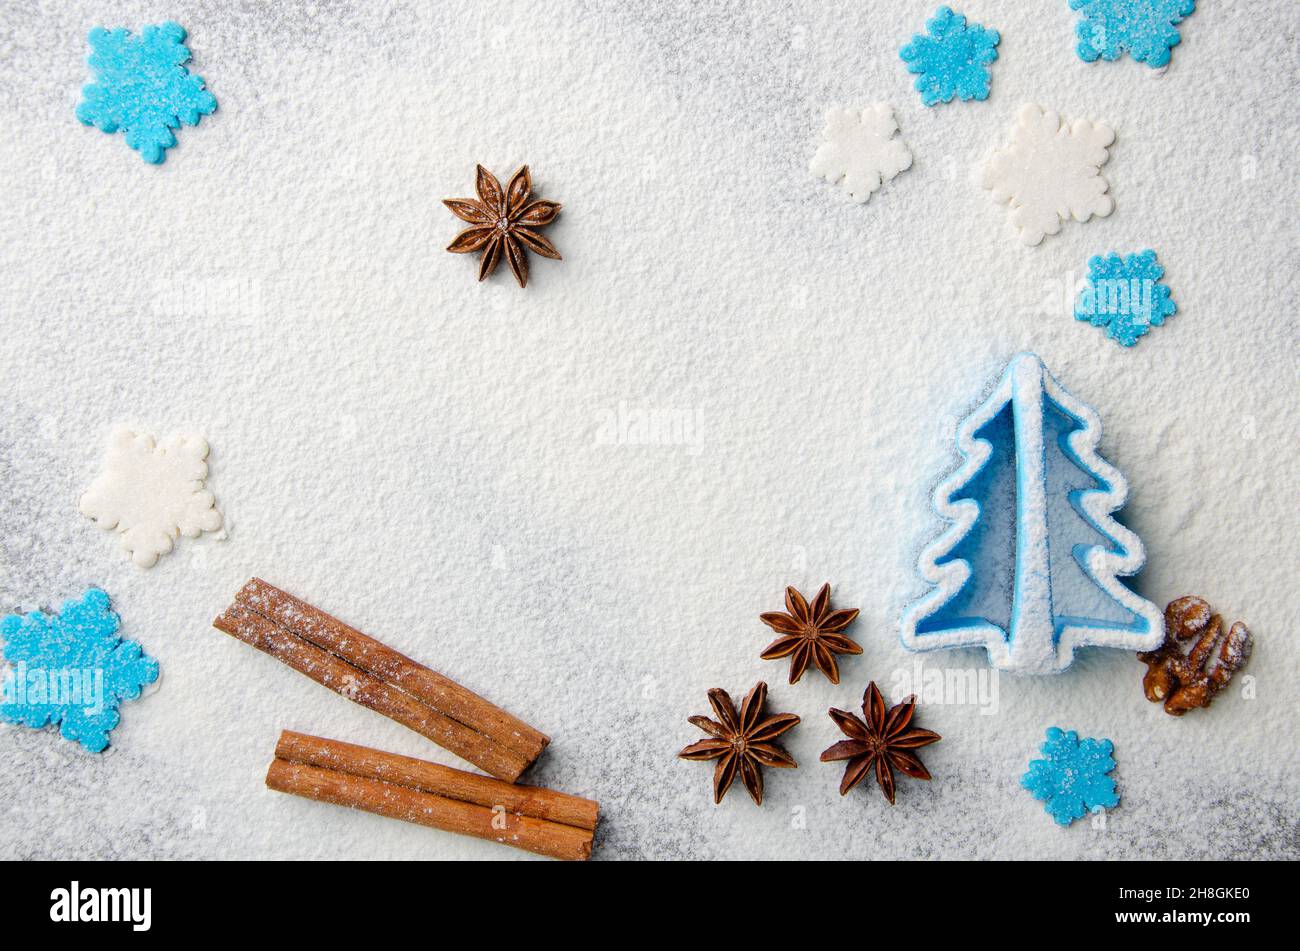 Christmas kitchen background made of flour, cinnamon sticks, anise,  cookie cutter and sugar sprinkles Stock Photo